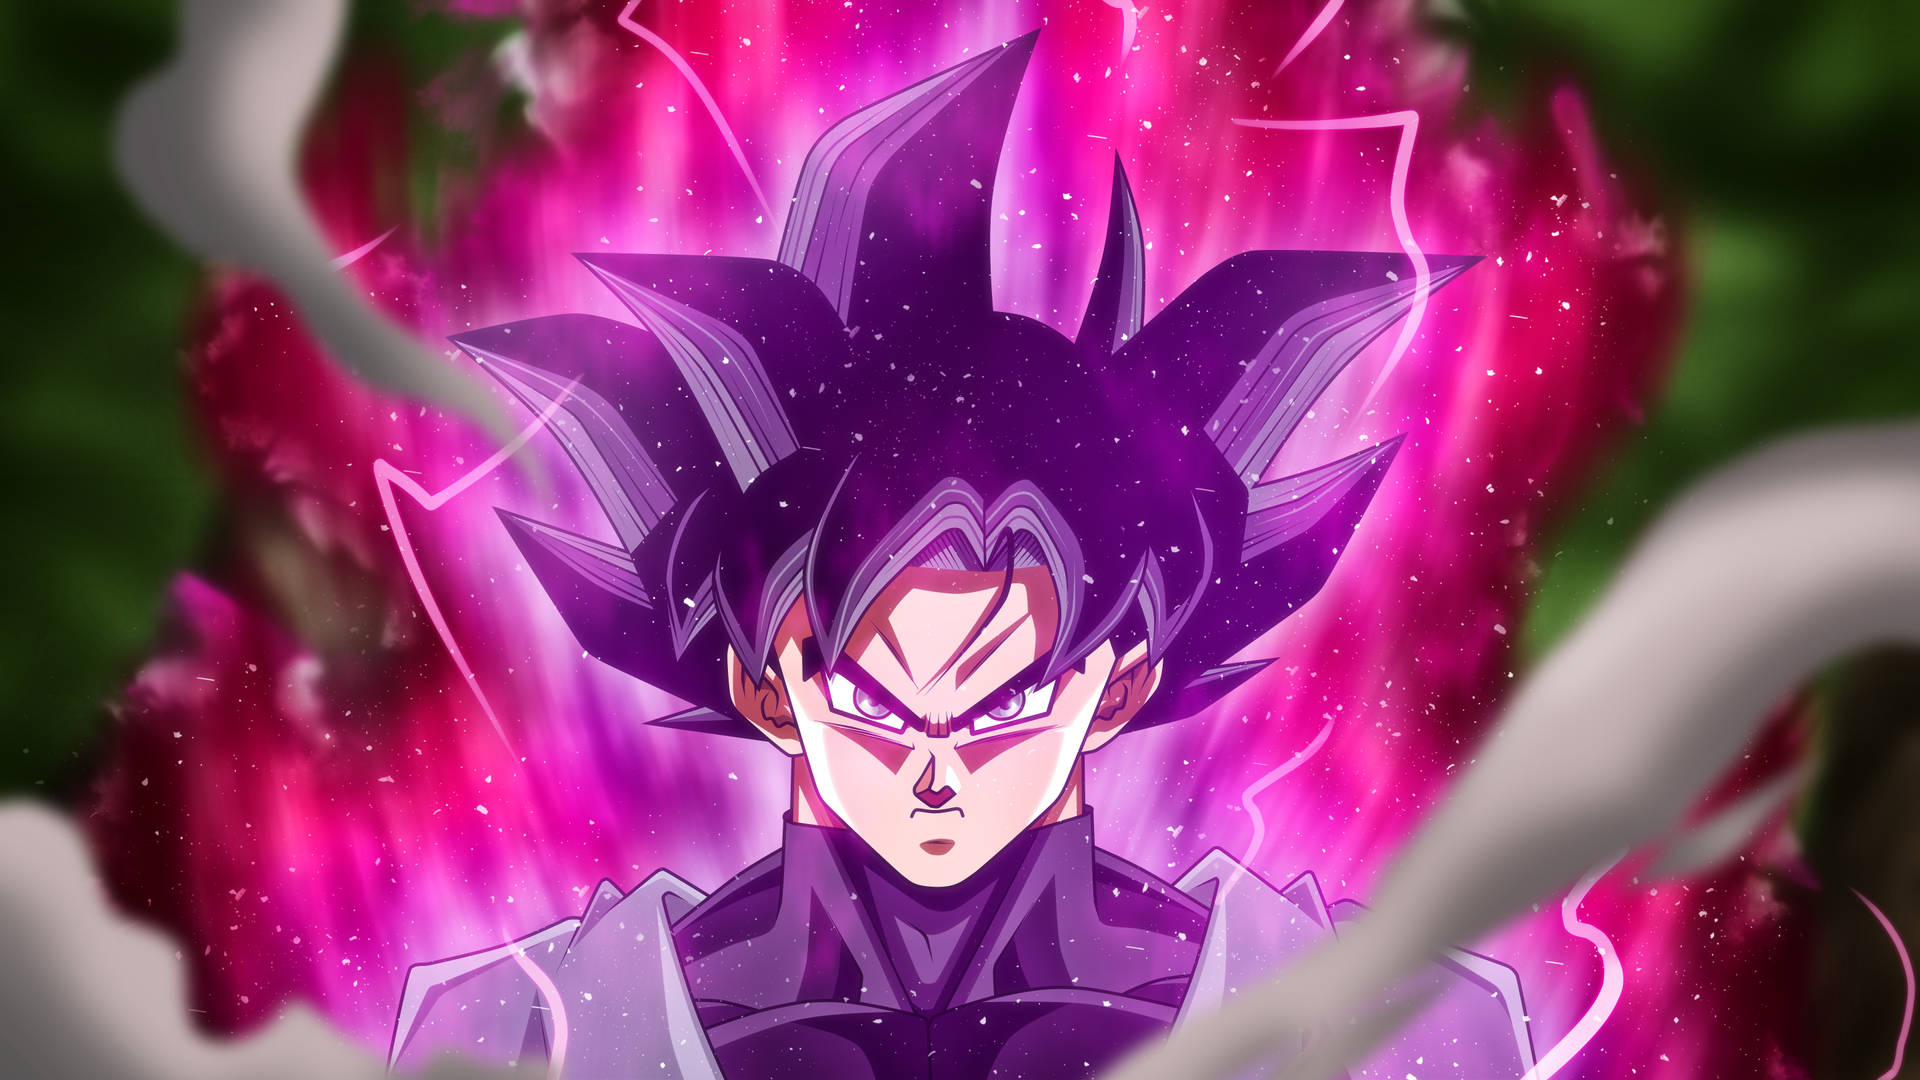 britt hollingsworth recommends goku black wallpapers pic